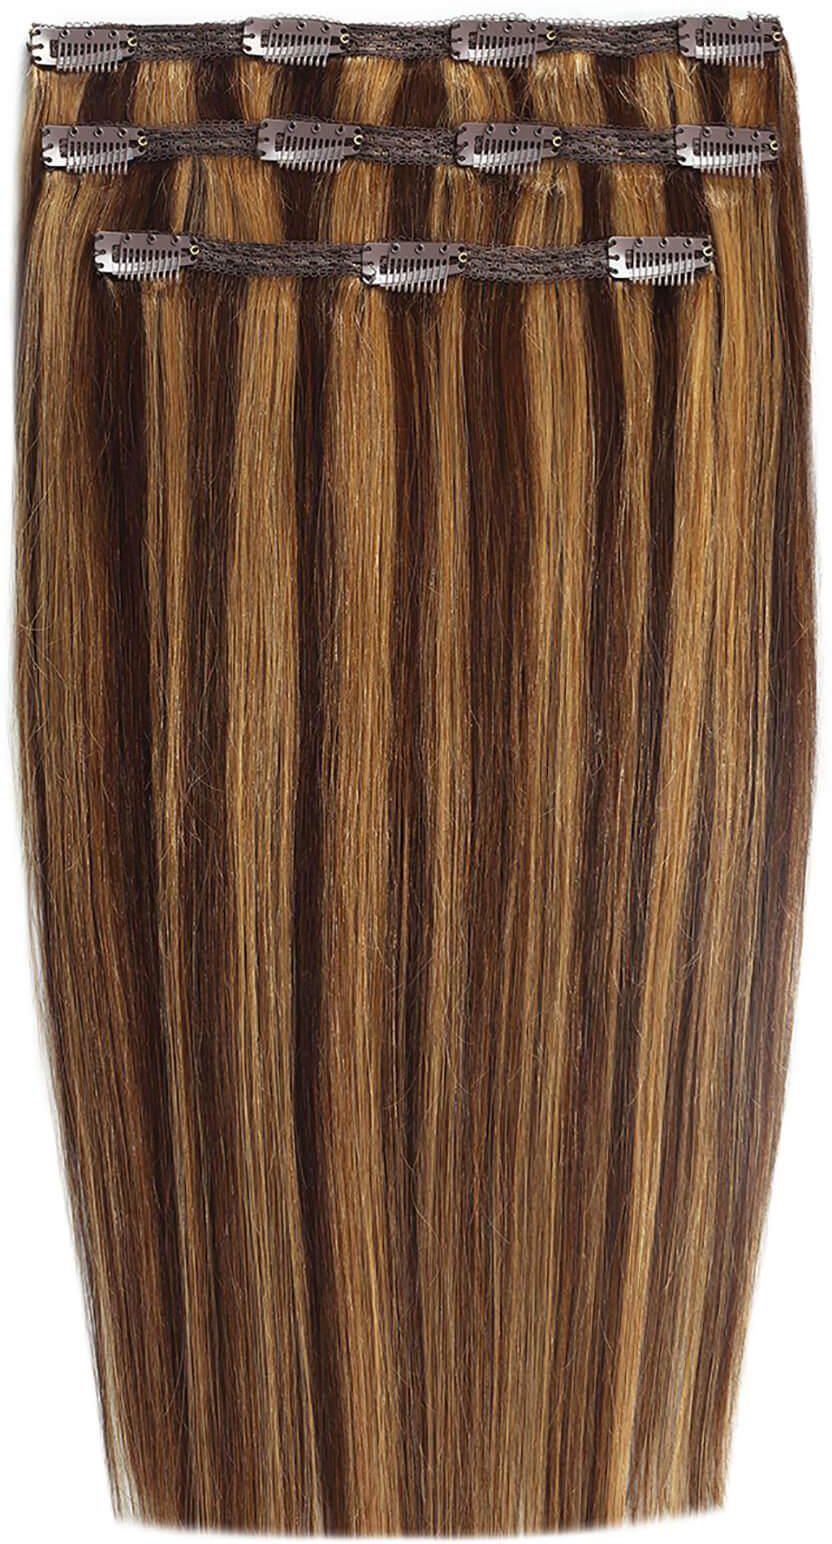 Beauty Works Deluxe Clip-In Hair Extensions 18 Inch - Blondette 4/27 price  from lookfantastic in UAE - Yaoota!